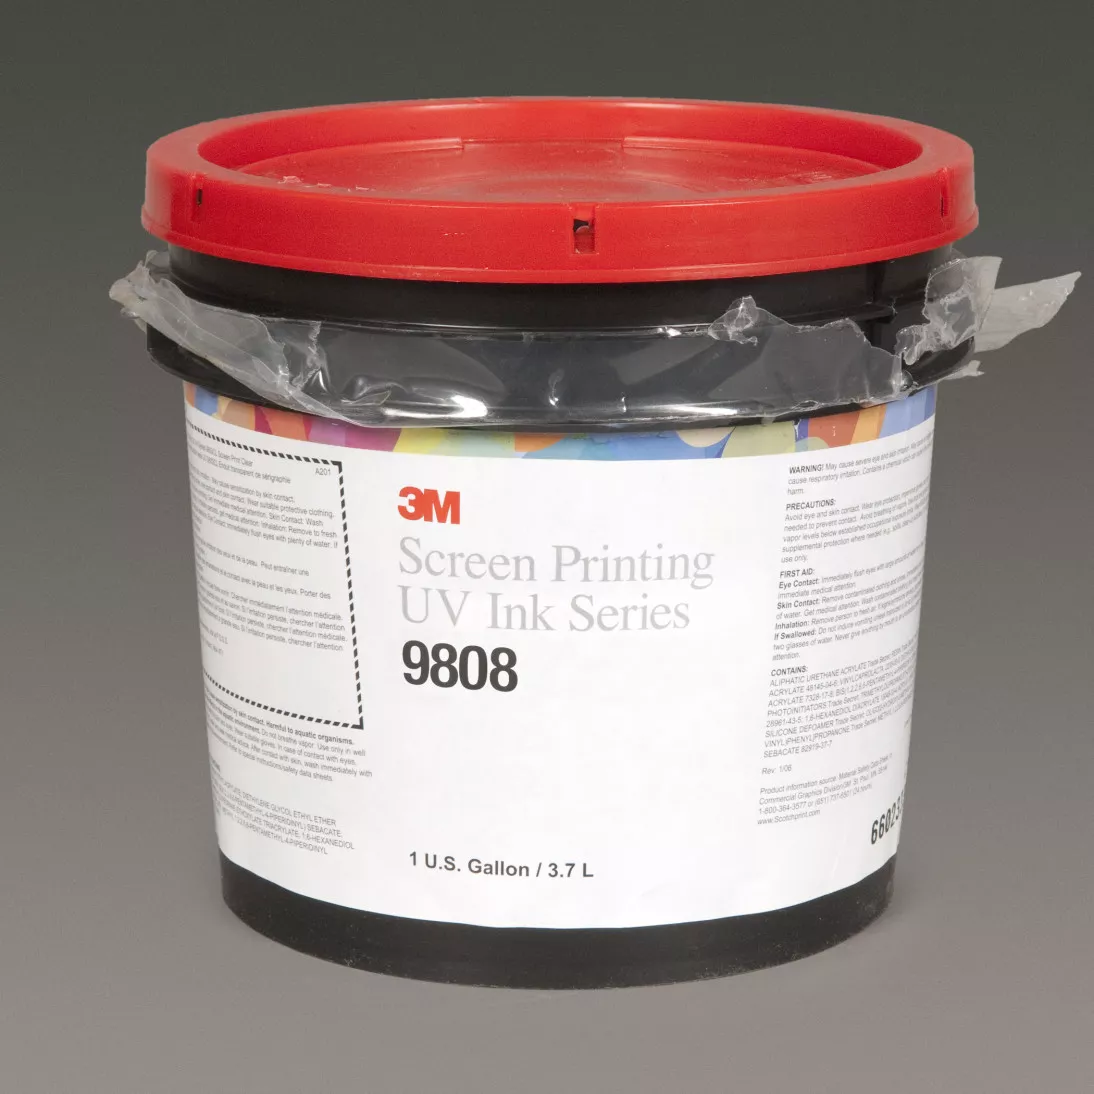 3M™ Screen Printing UV Ink 9808, Opaque White, 1 Gallon Container